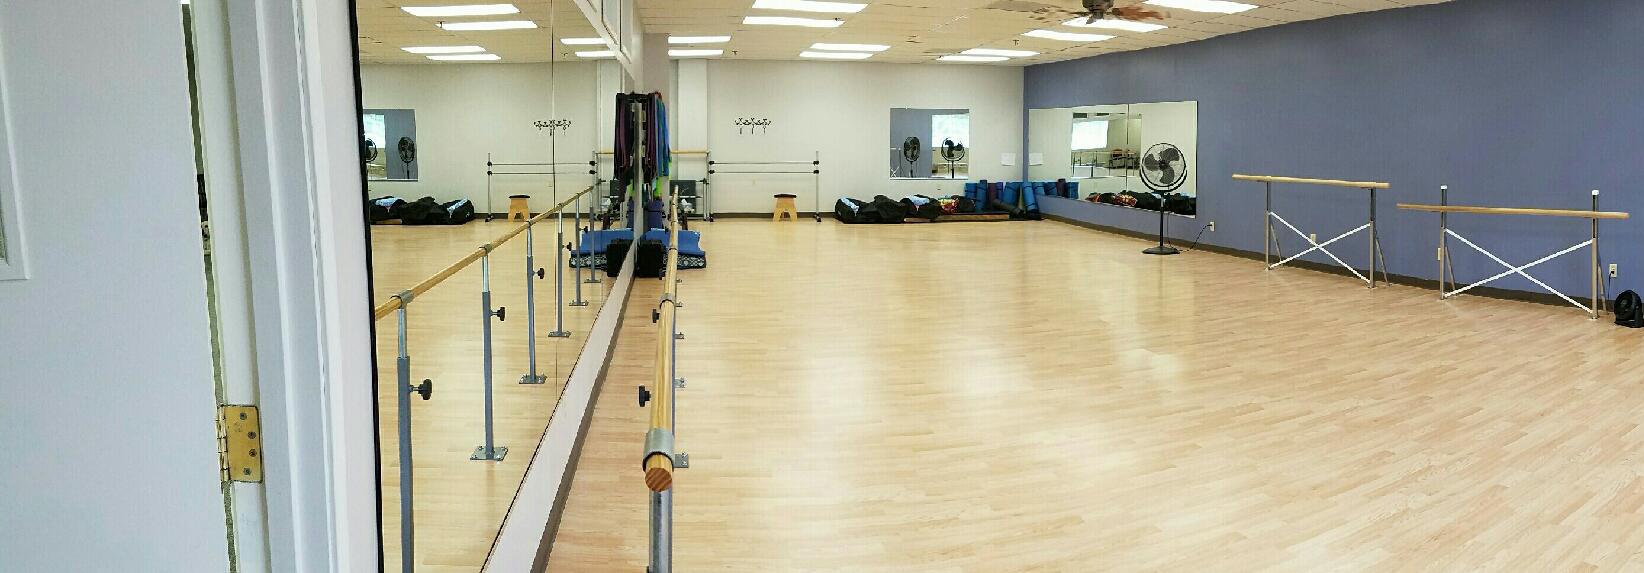 Check out our dance, yoga and group class studio at FitnessWorks, Inc